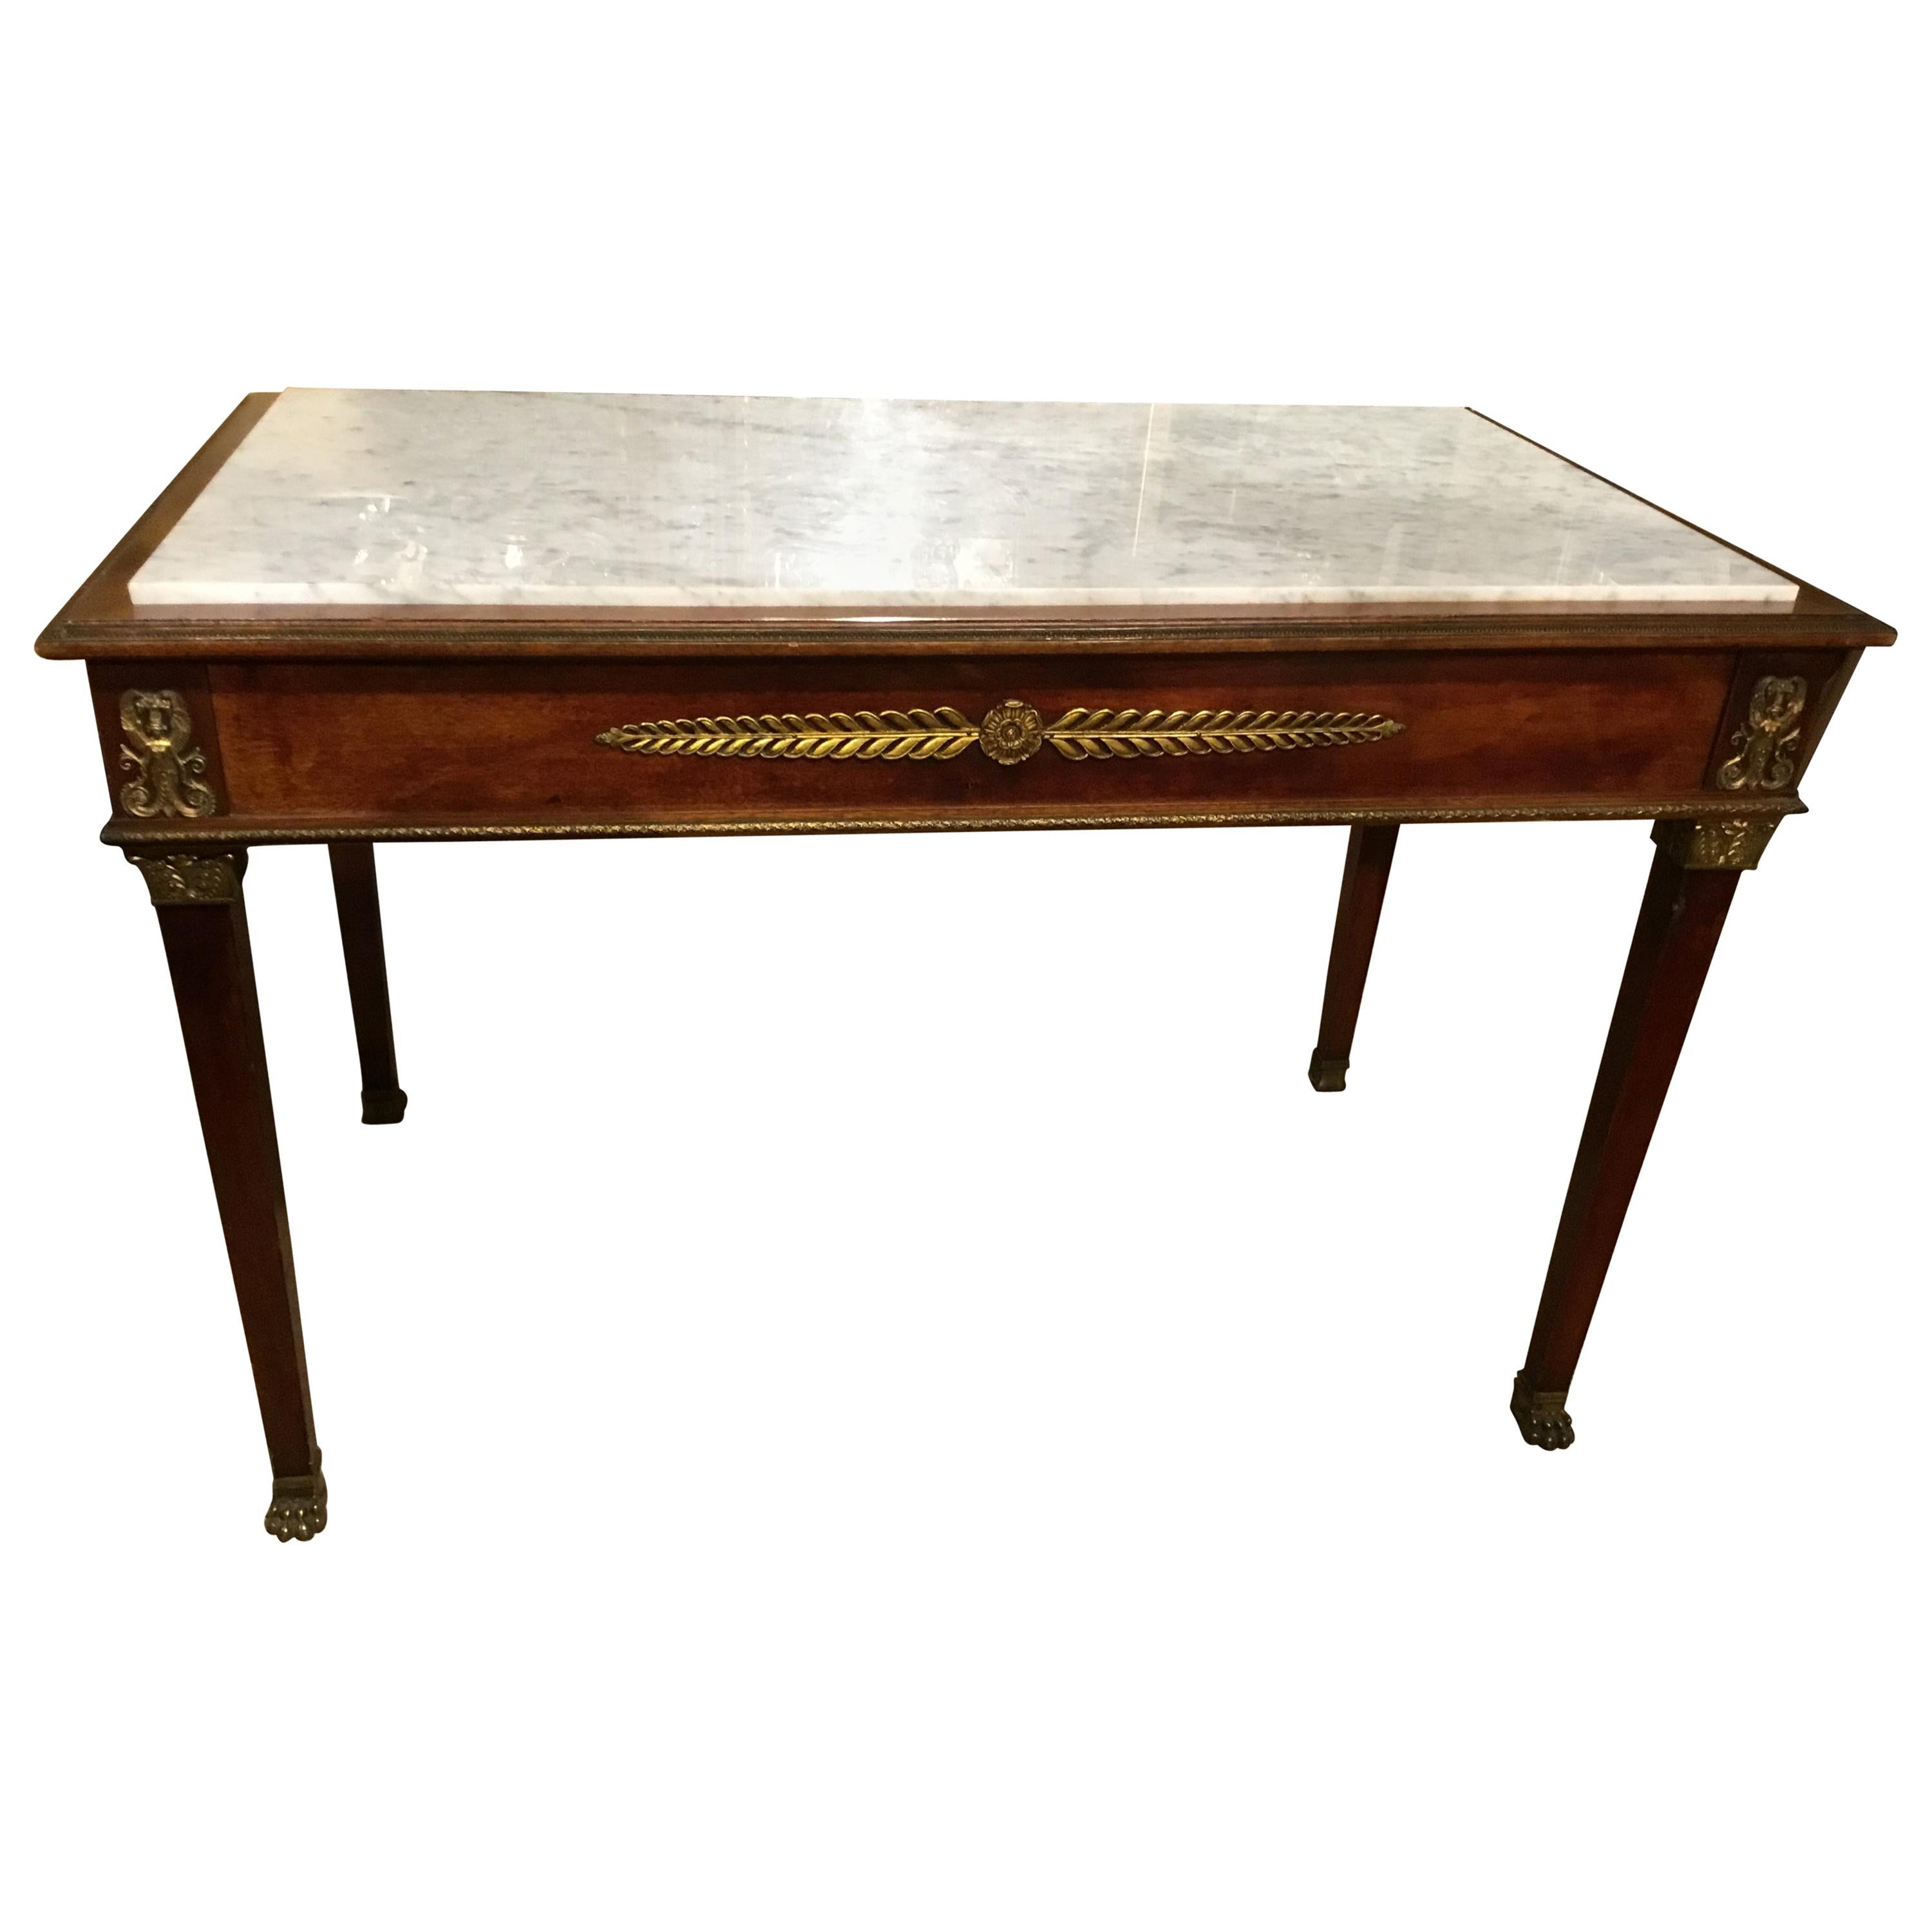 Empire Center Table in Mahogany with Bronze Mounts White Marble Top, 19 th c